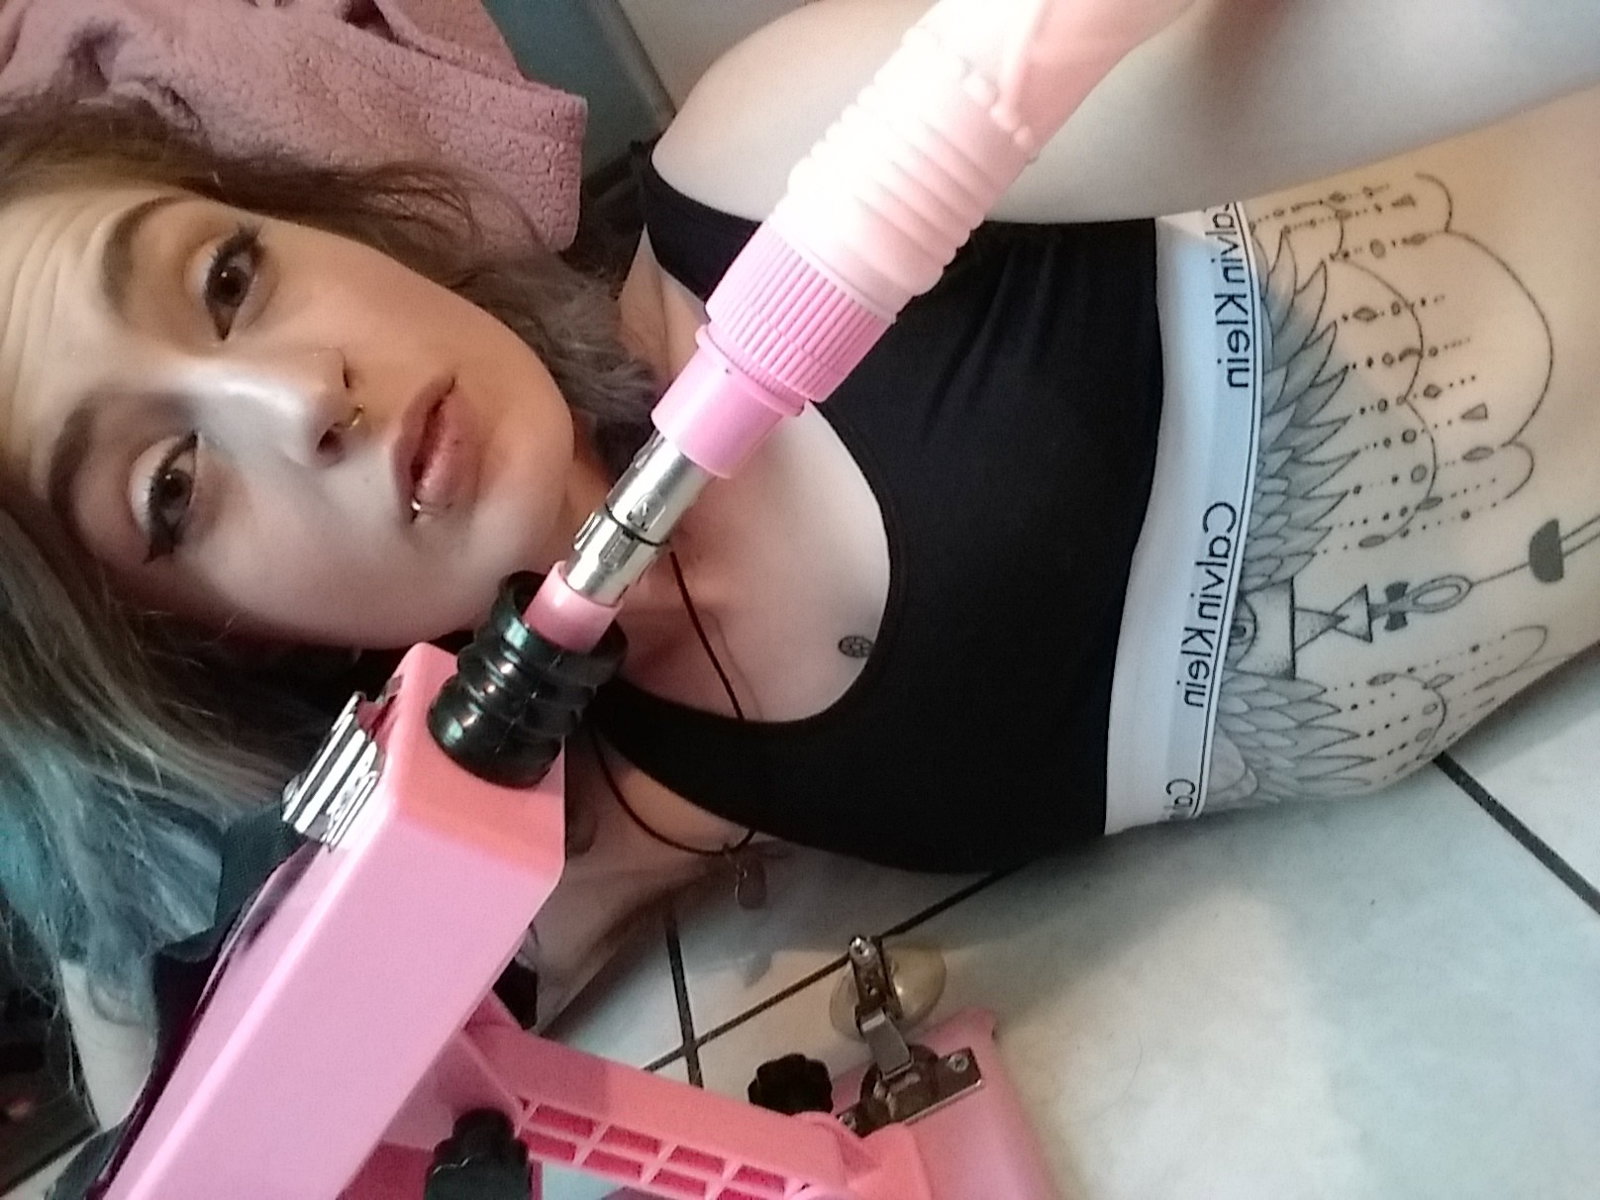 Photo by Mystic Moon Princess with the username @MysticMoonPrincess, who is a star user,  July 18, 2019 at 8:09 PM and the text says 'New content coming soon!! Follow me over on manyvids to see it first! 
#mvgirl #manyvids #fuckmachine #blowjob #amateur #amature #buymedrugsnotjewelry #mysticmoonprincess #babe #tattoo #tattooedwomen #hot #solo #masturbation'